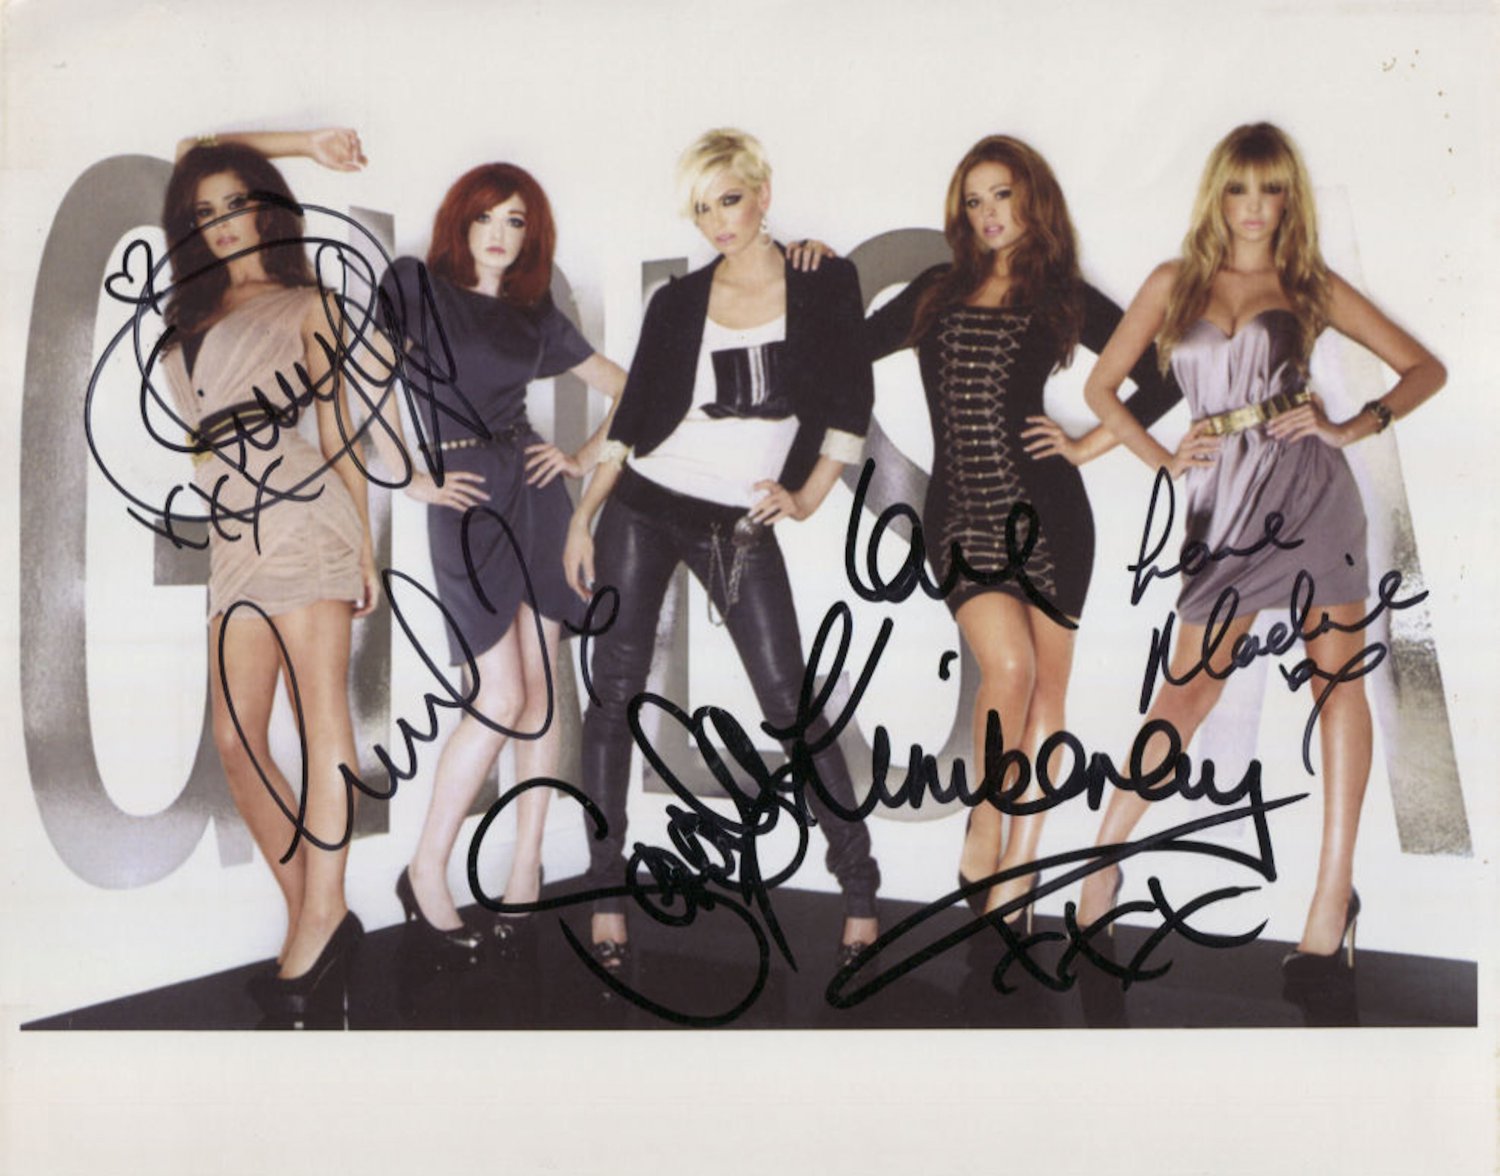 Girls Aloud (Band) FULLY SIGNED 8" x 10" Photo + Certificate Of Authentication 100% Genuine